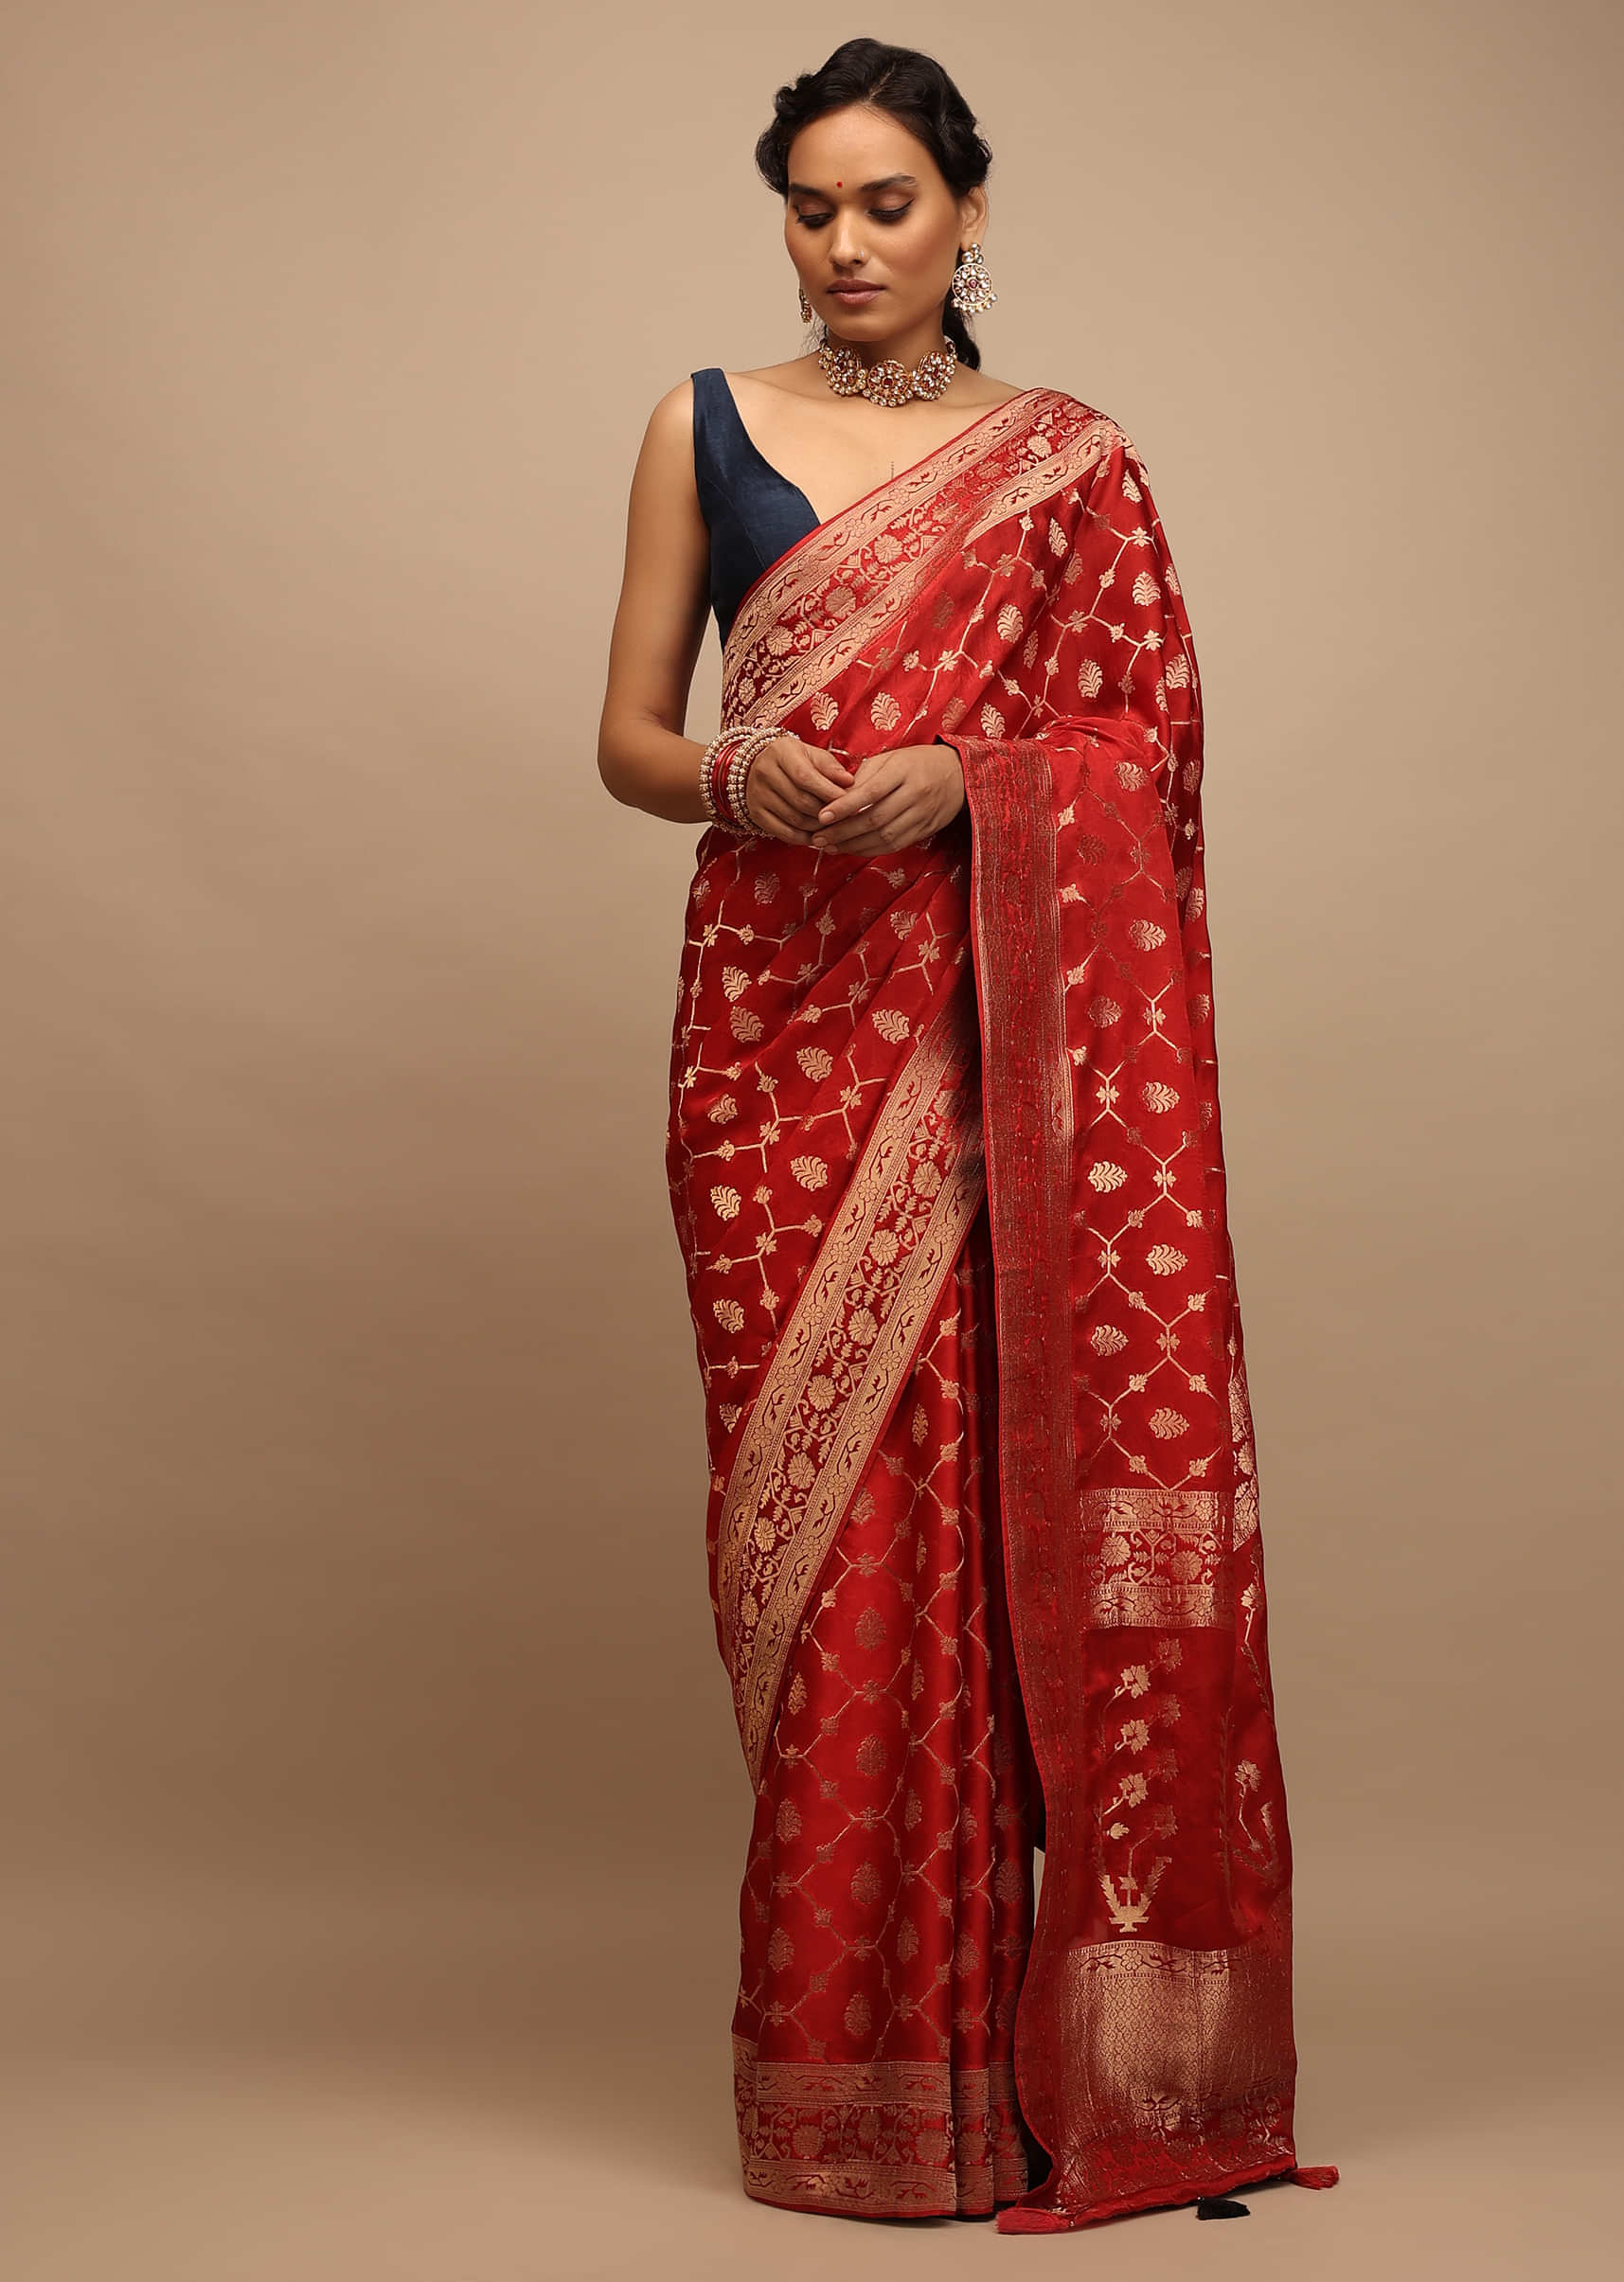 Fiery Red Saree In Satin Silk With Woven Geometric Jaal And Butti Design